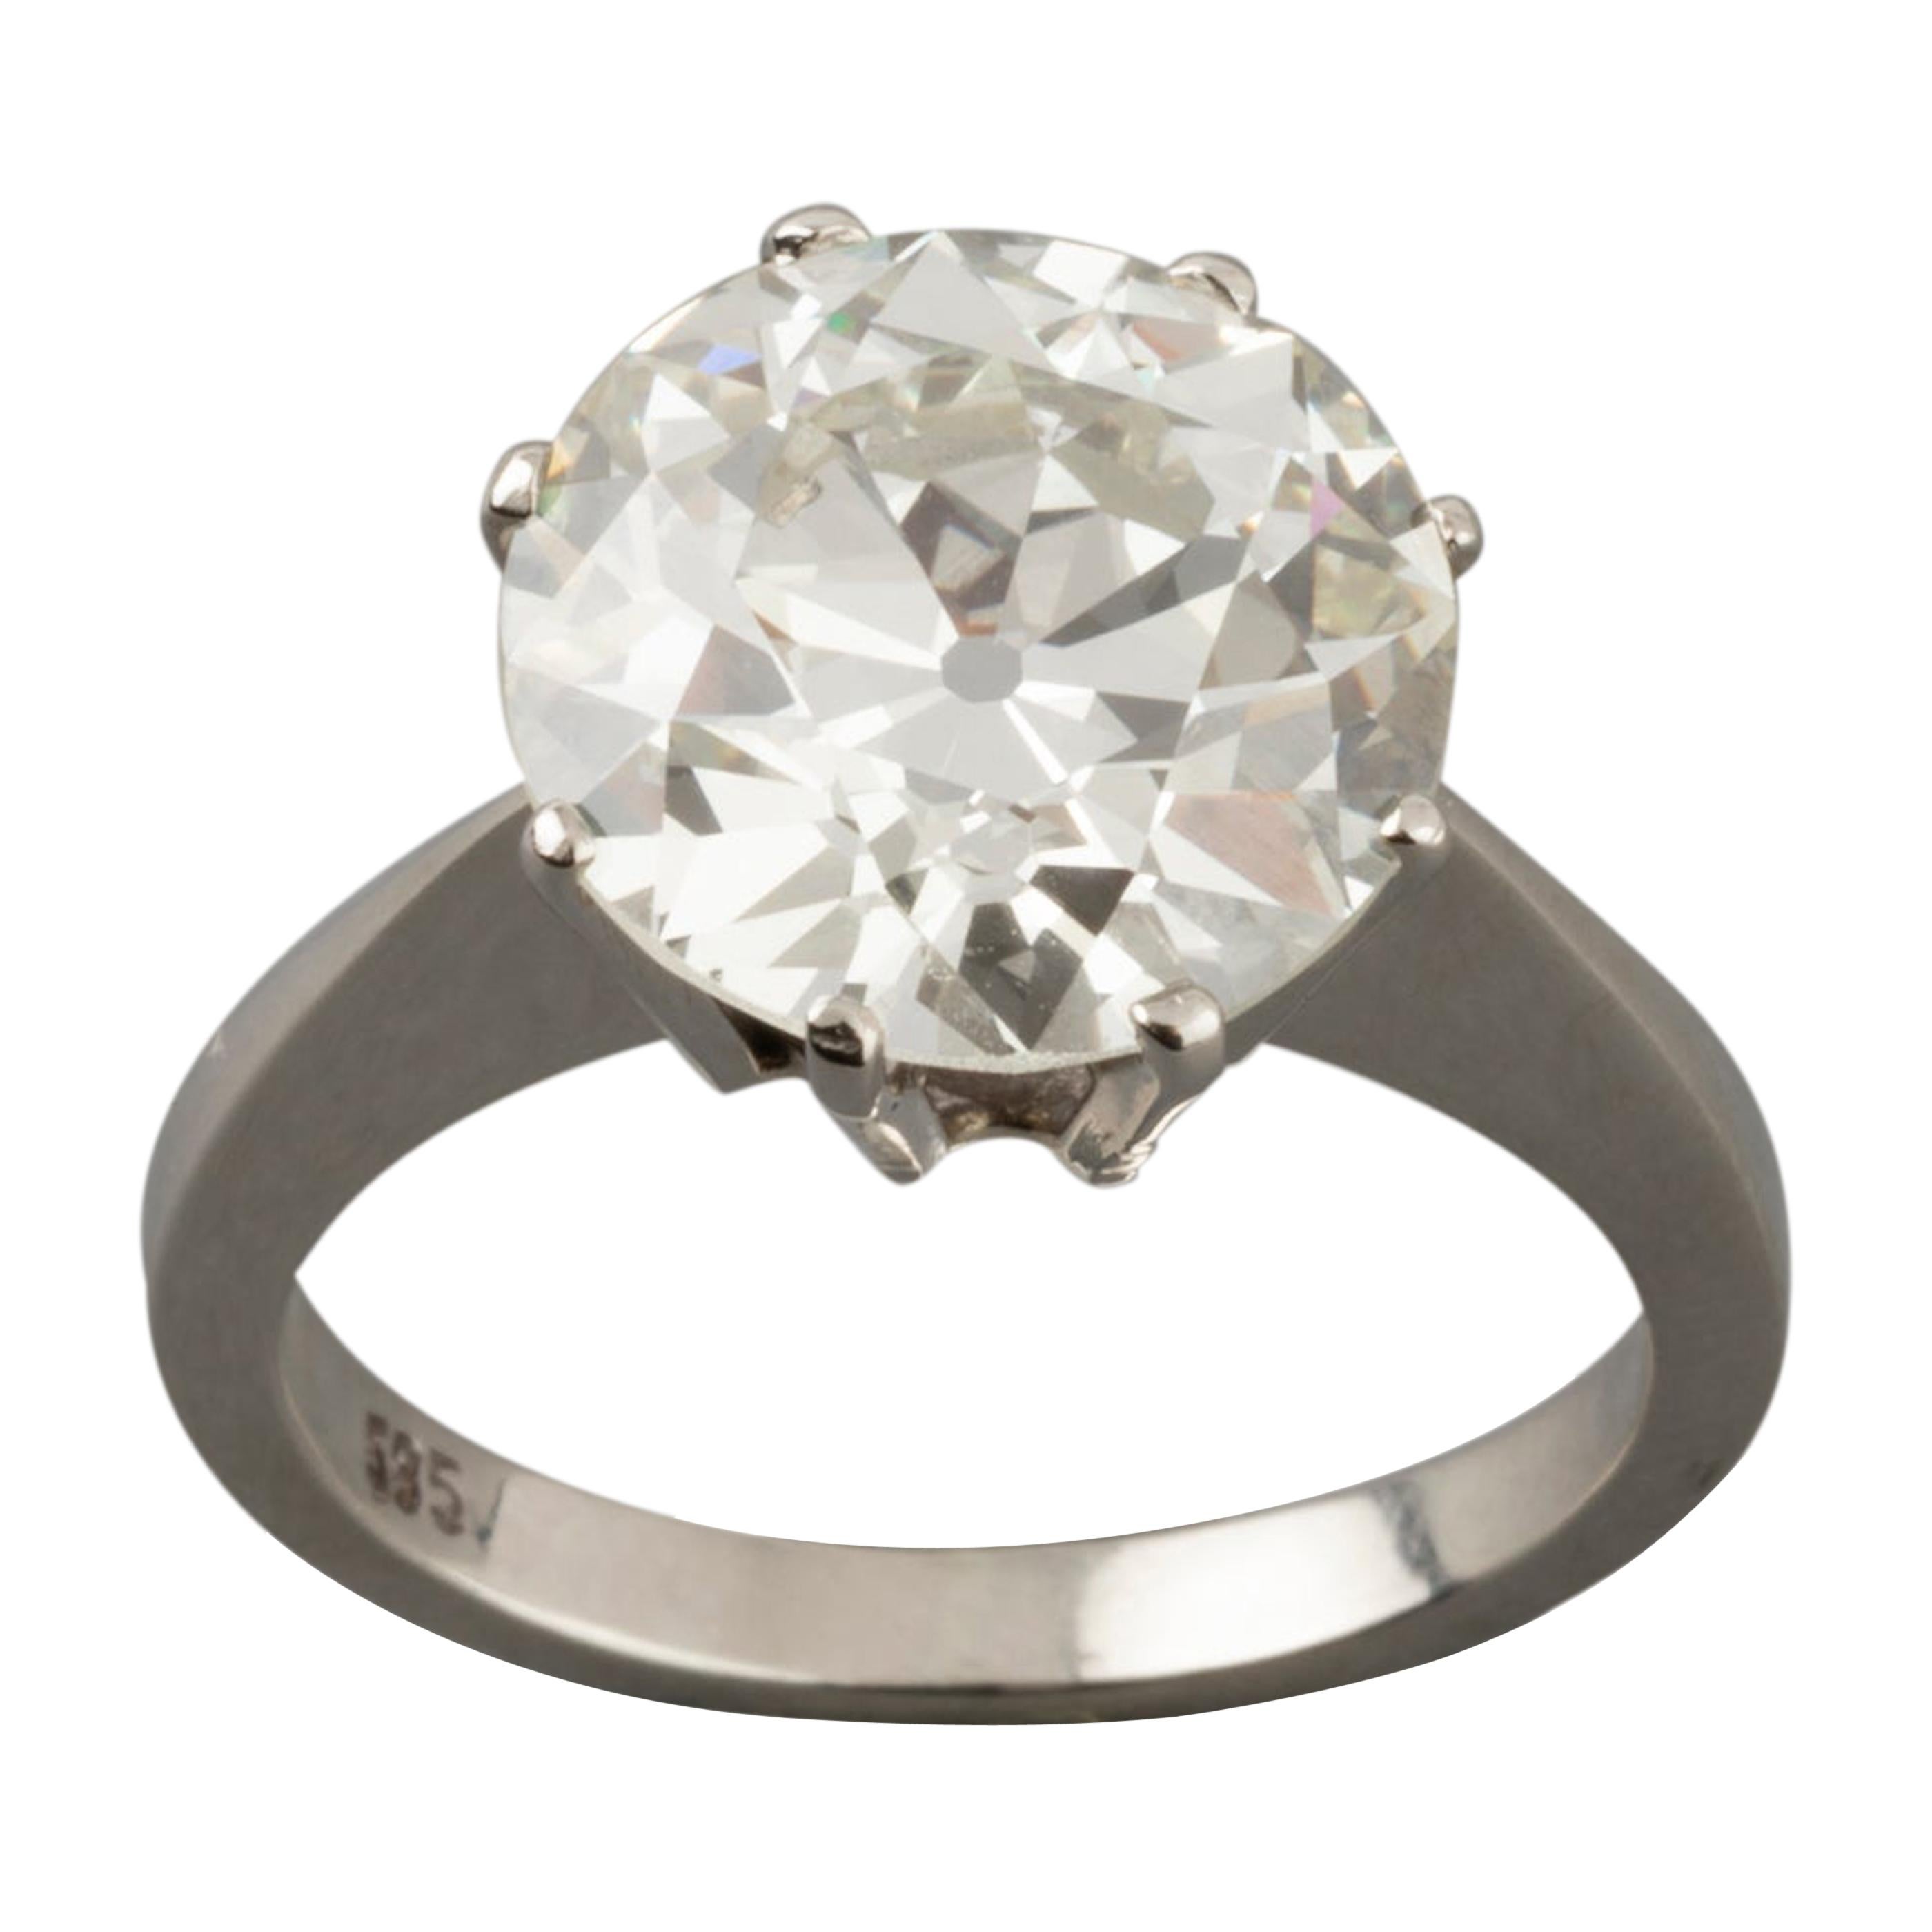 Certified 5.03 Carat Diamond Solitaire Engagement Ring